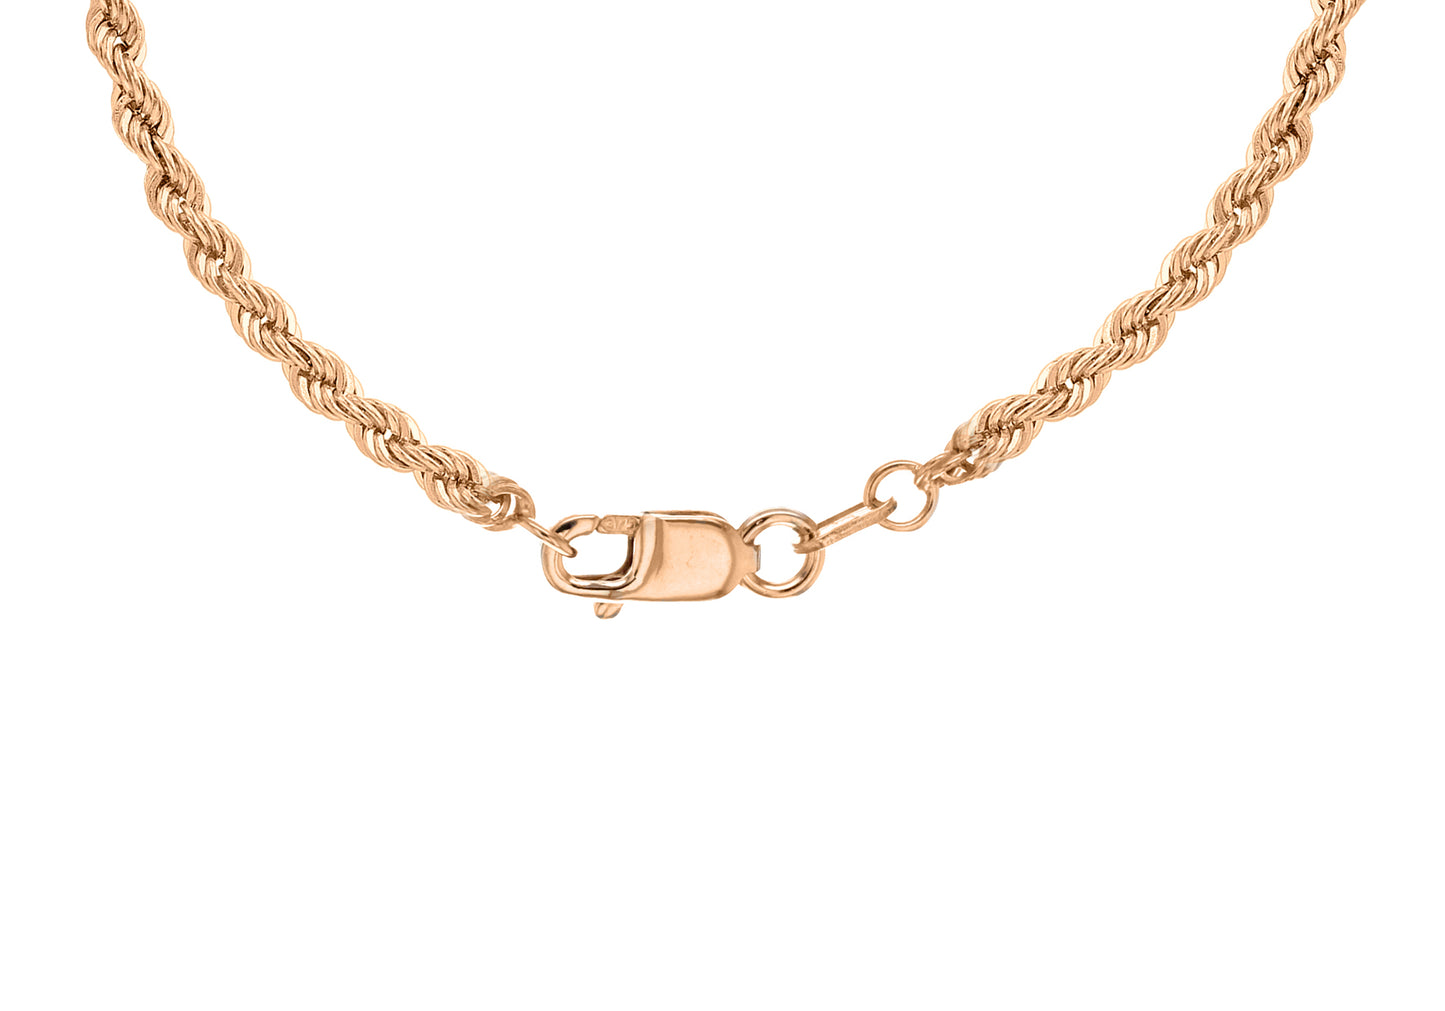 9K Rose Gold 2.1mm Rope Chain 16"